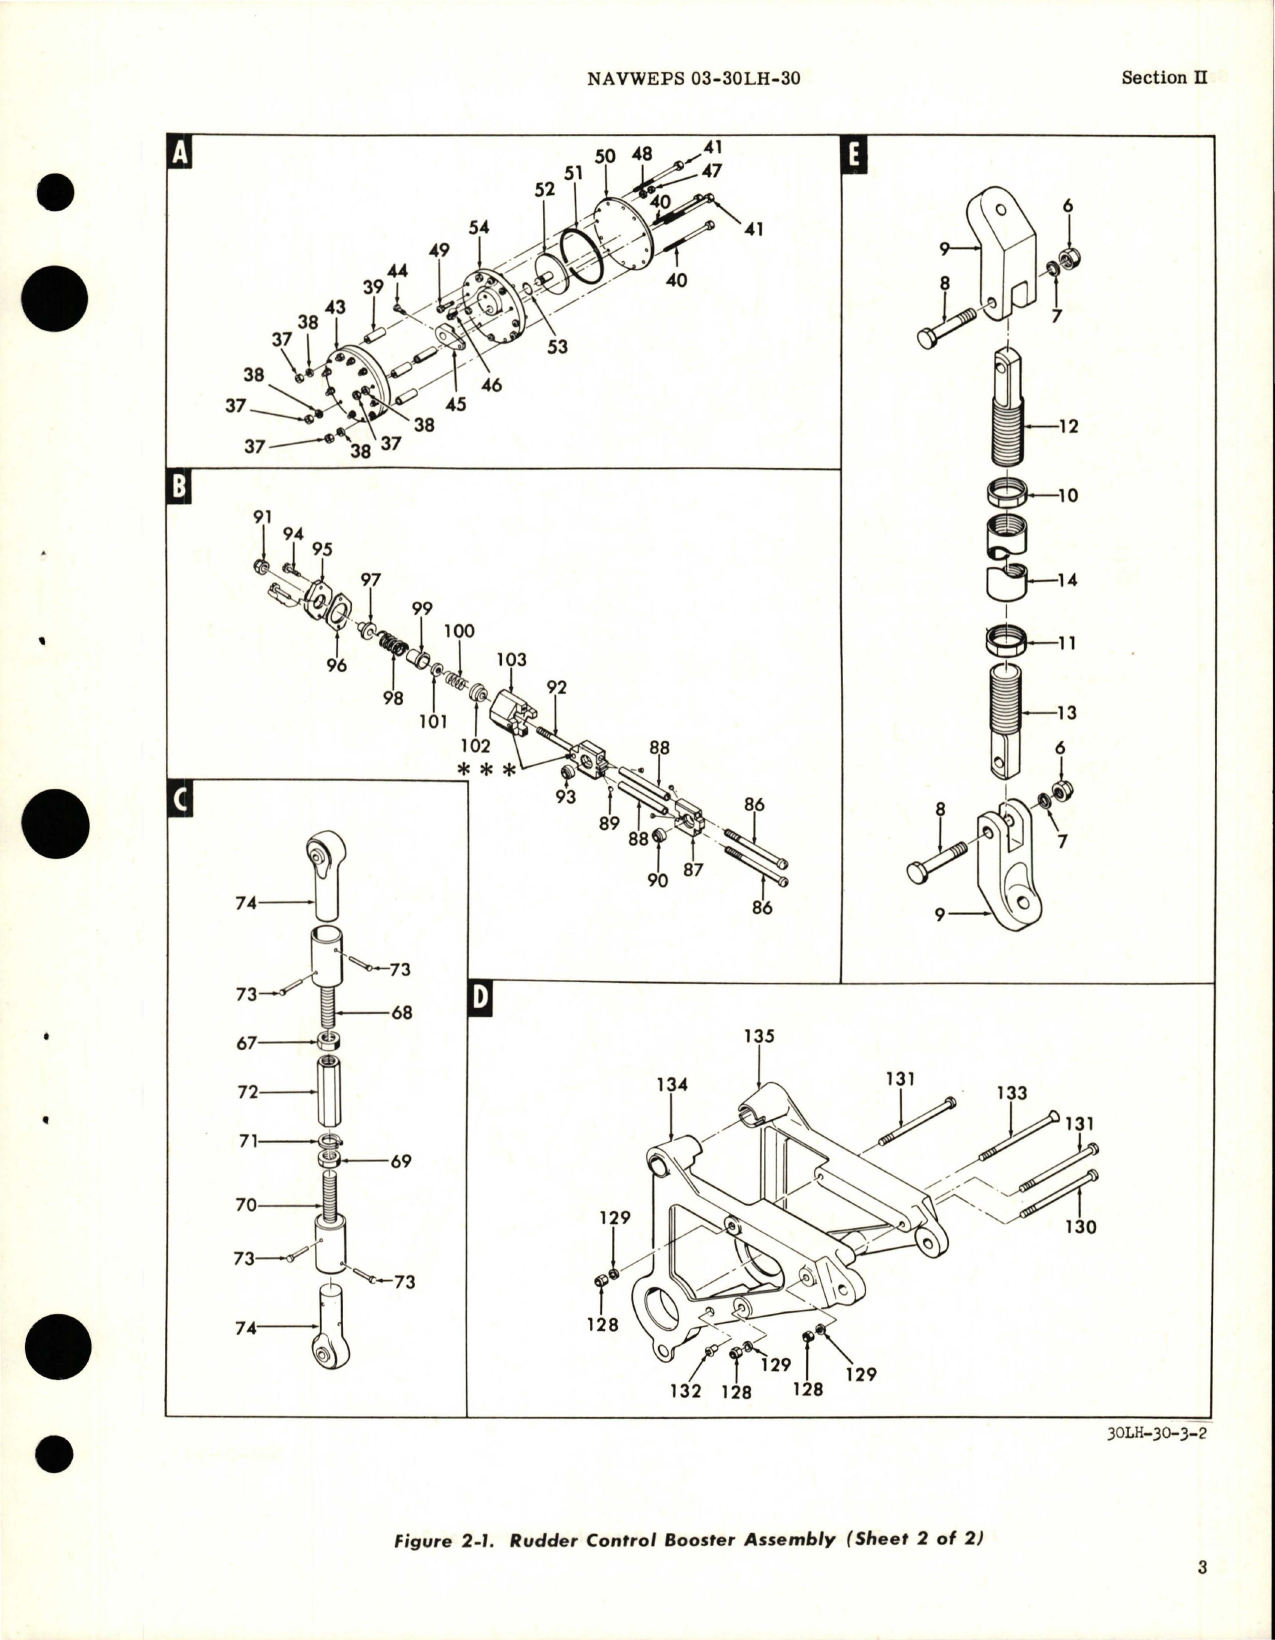 Sample page 7 from AirCorps Library document: Overhaul Instructions for Rudder Control Booster Assembly - Part 372021-5 